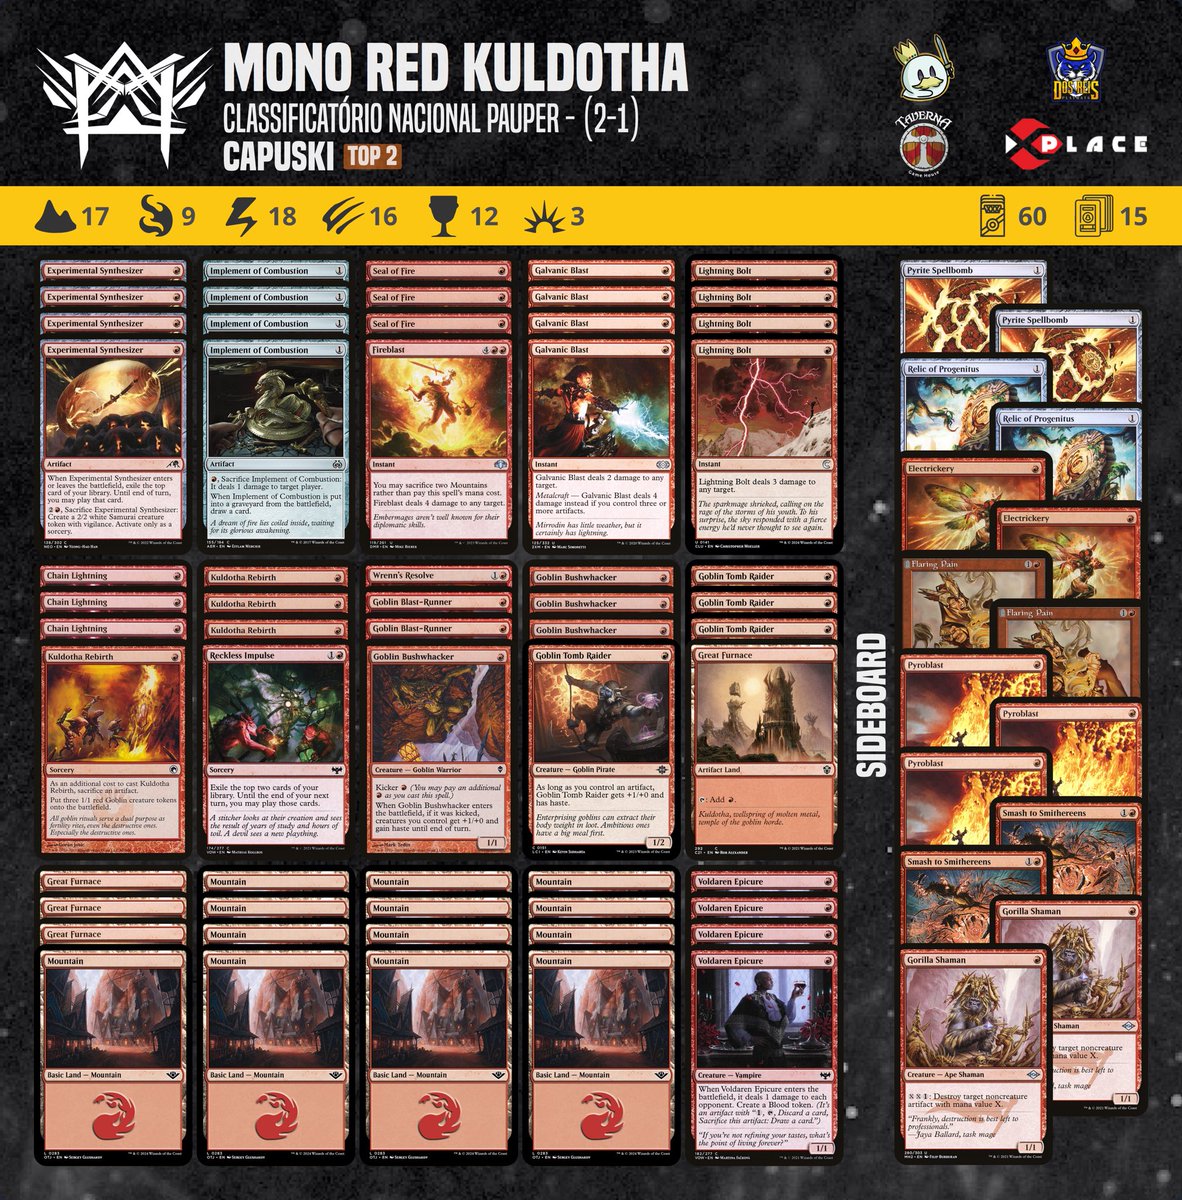 Our athlete Capuski secured a spot in the National Pauper Qualifying Tournament with this Mono Red Kuldotha decklist. #pauper #magic #mtgcommon #metagamepauper #mtgpauper #magicthegathering #wizardsofthecoast @PauperDecklists @fireshoes